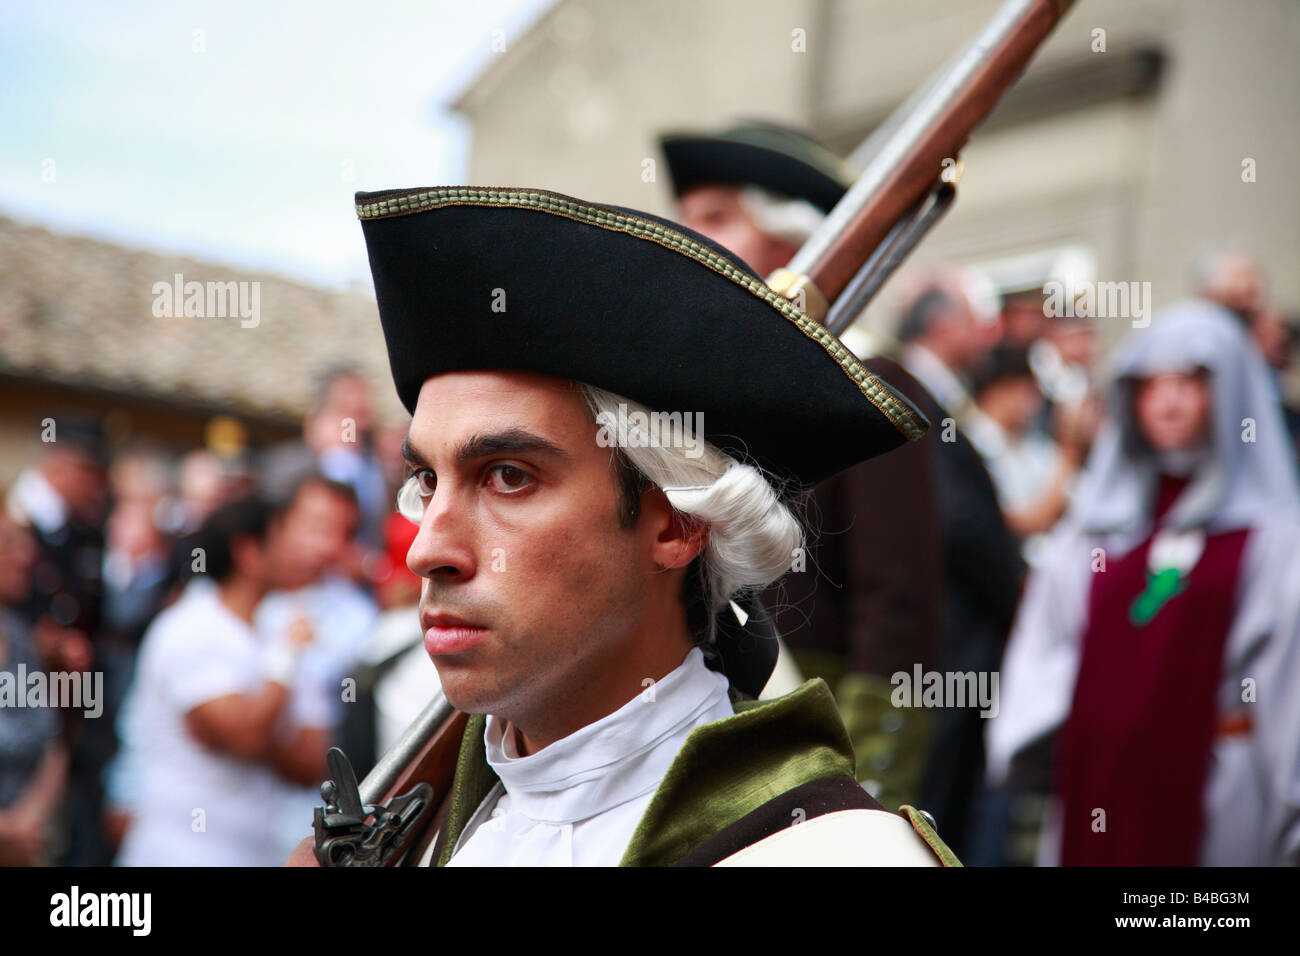 young man in 18th century military uniform with musket and tricorn hat Stock Photo